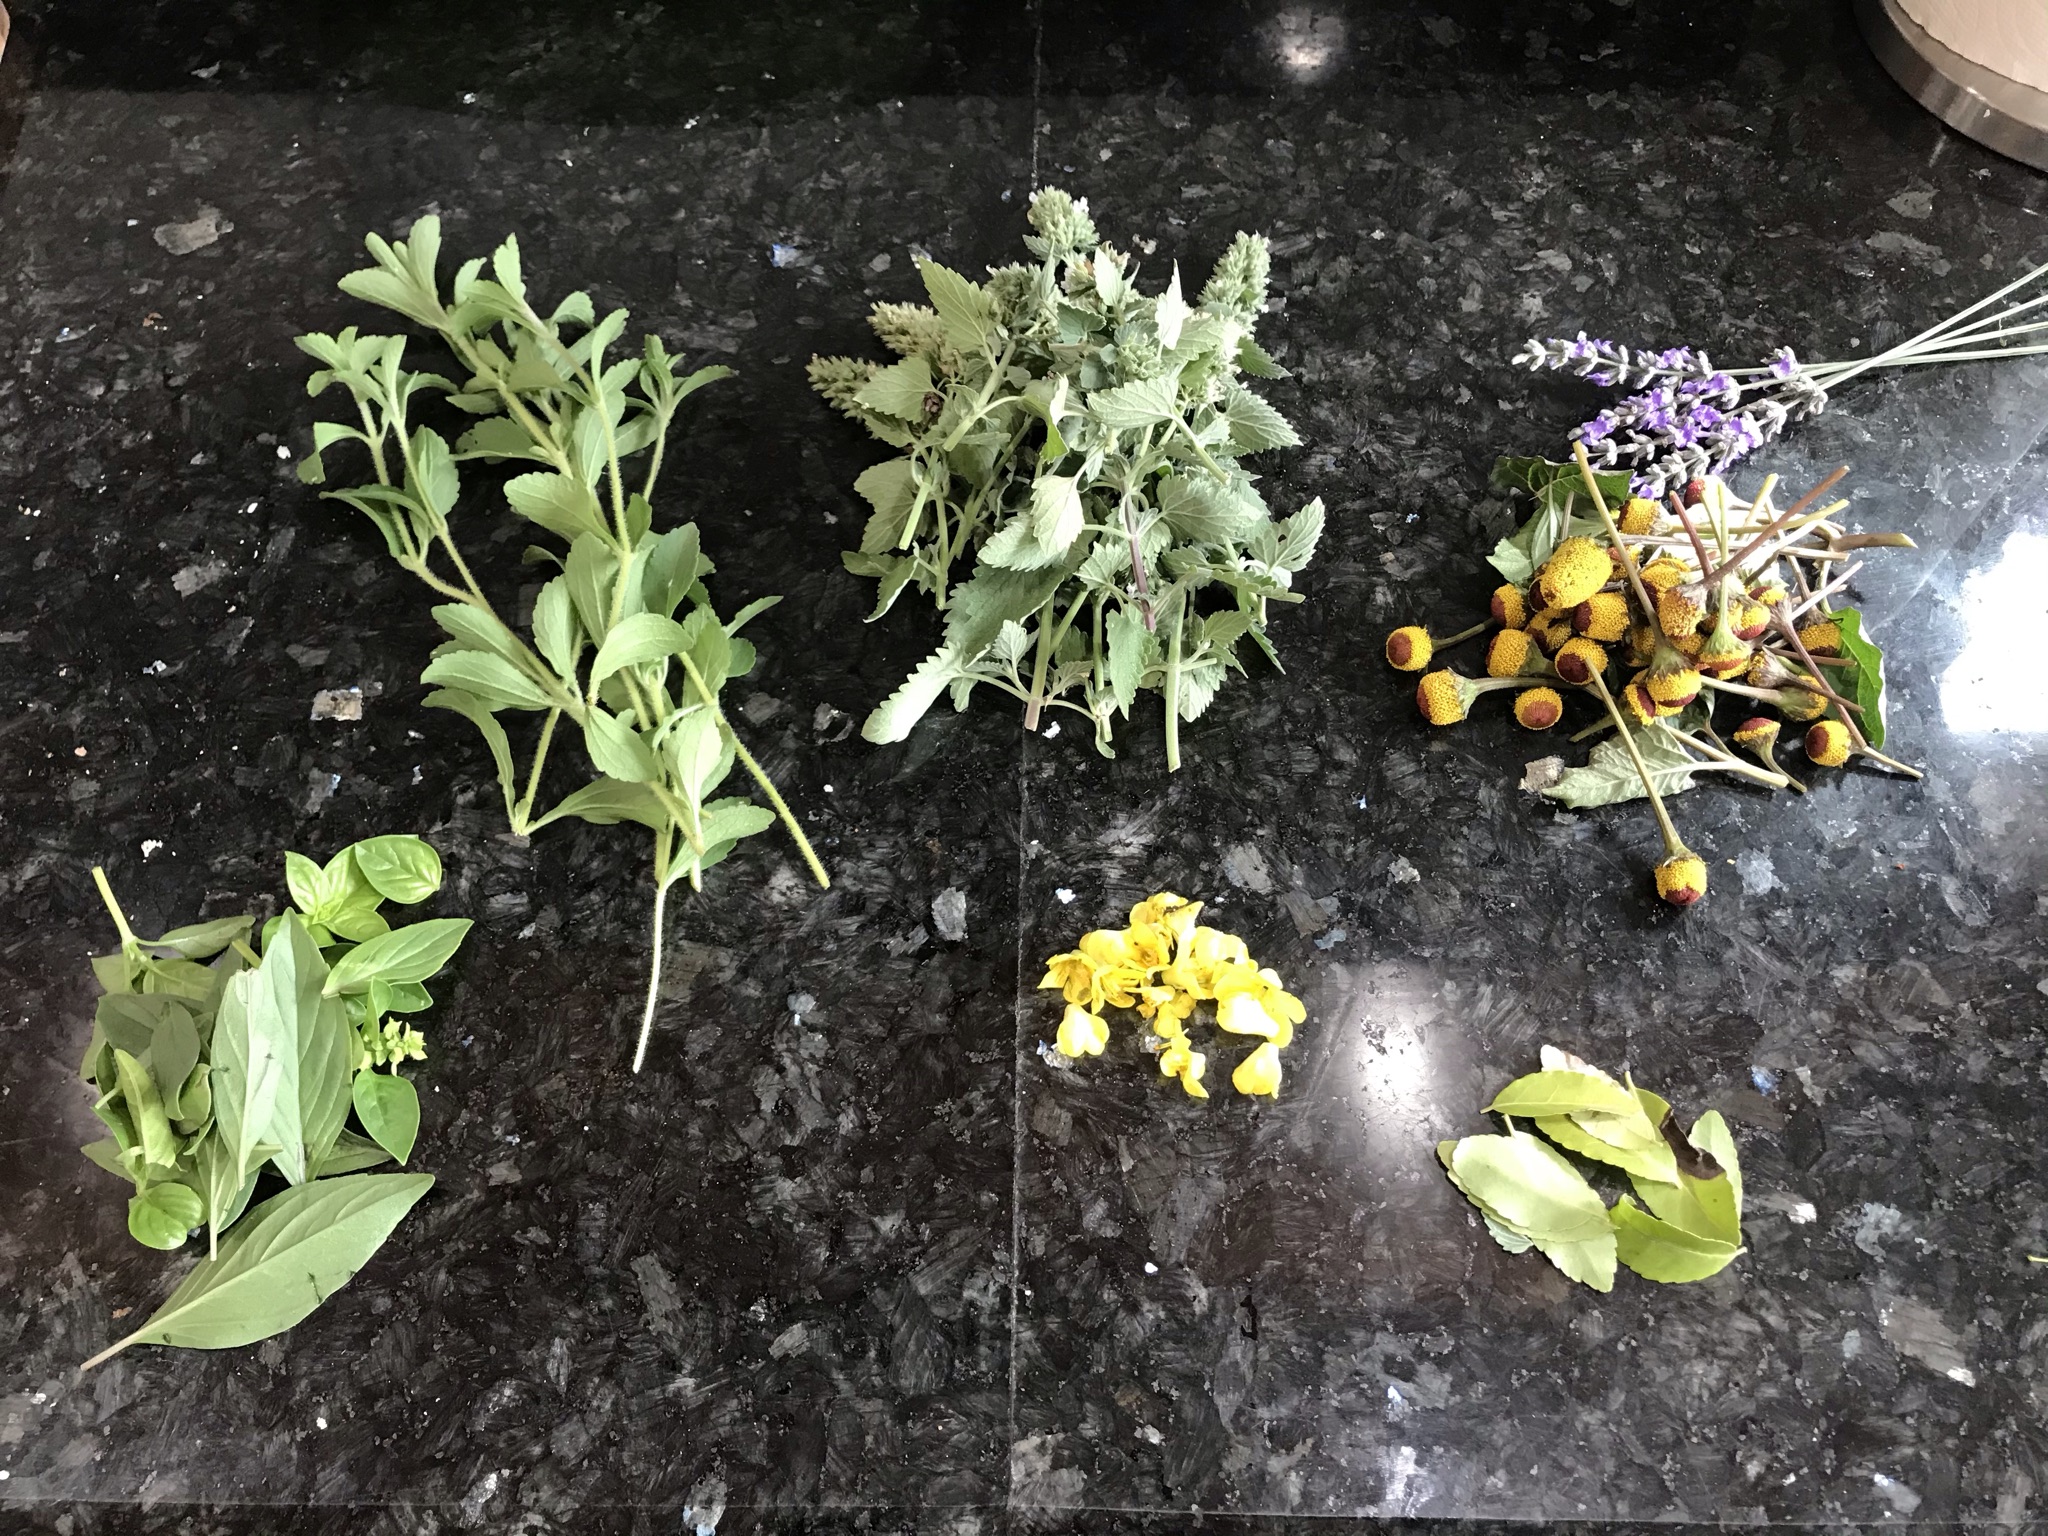 Herbs that have just been harvested from the garden